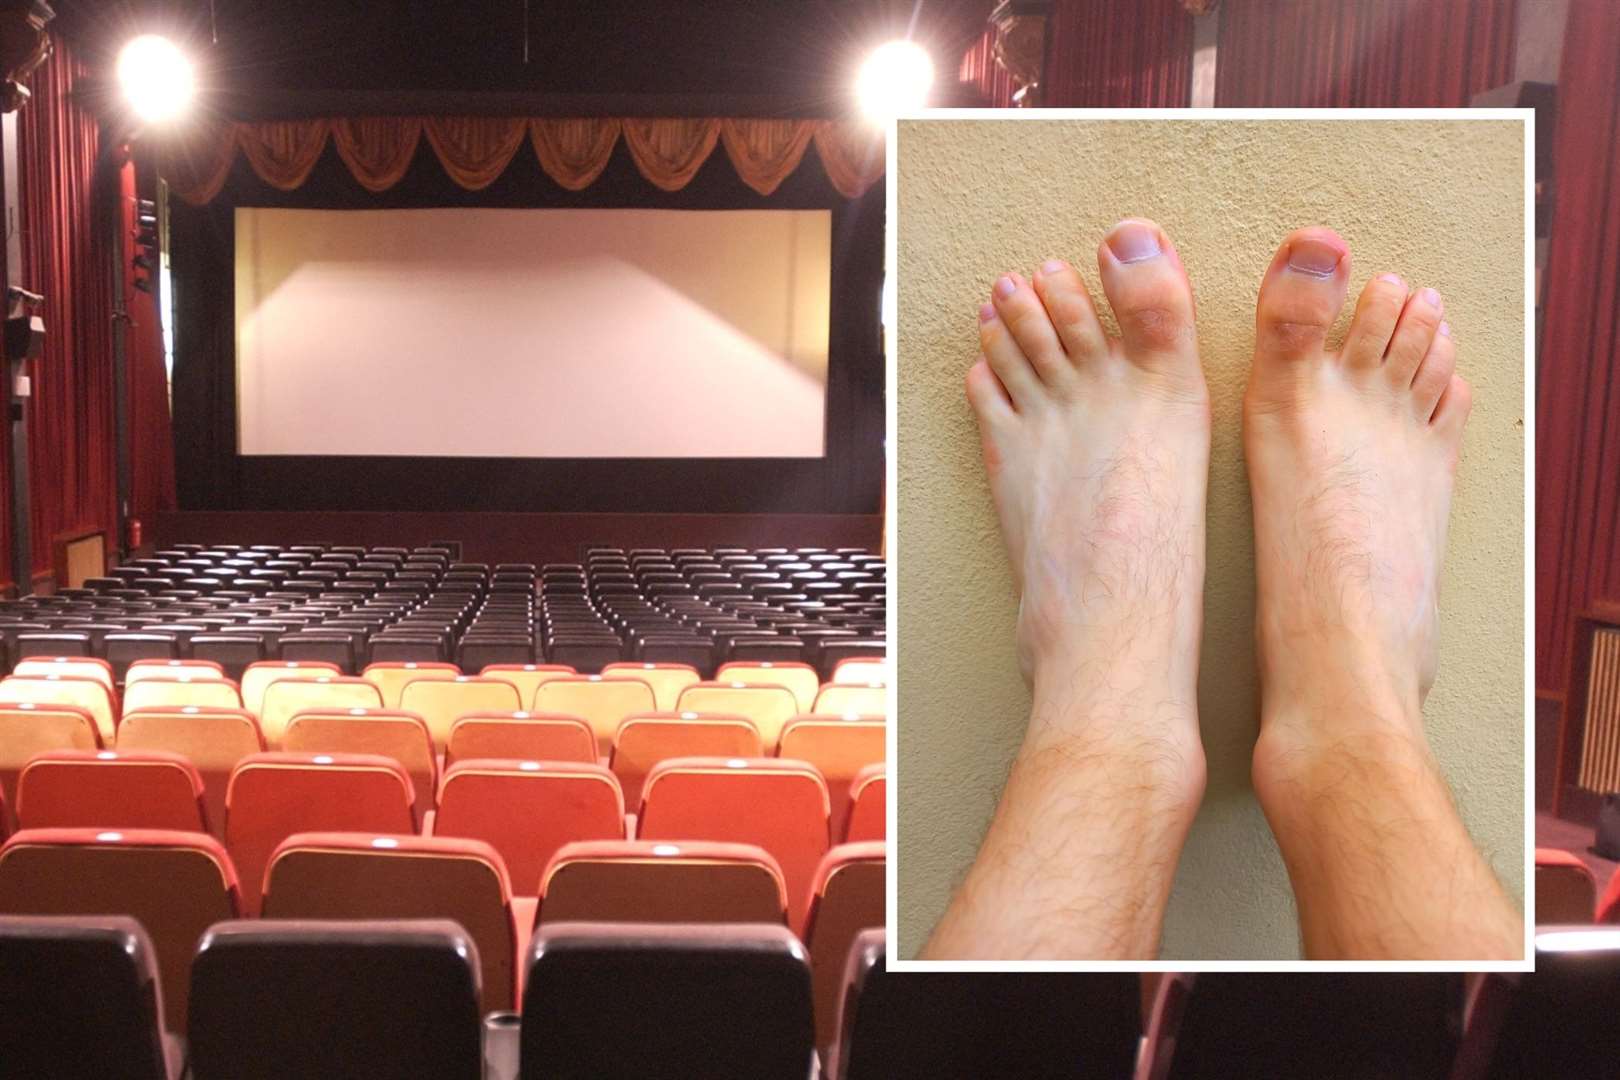 The Carlton Cinema has issued a plea for people to stop watching movies in bare feet